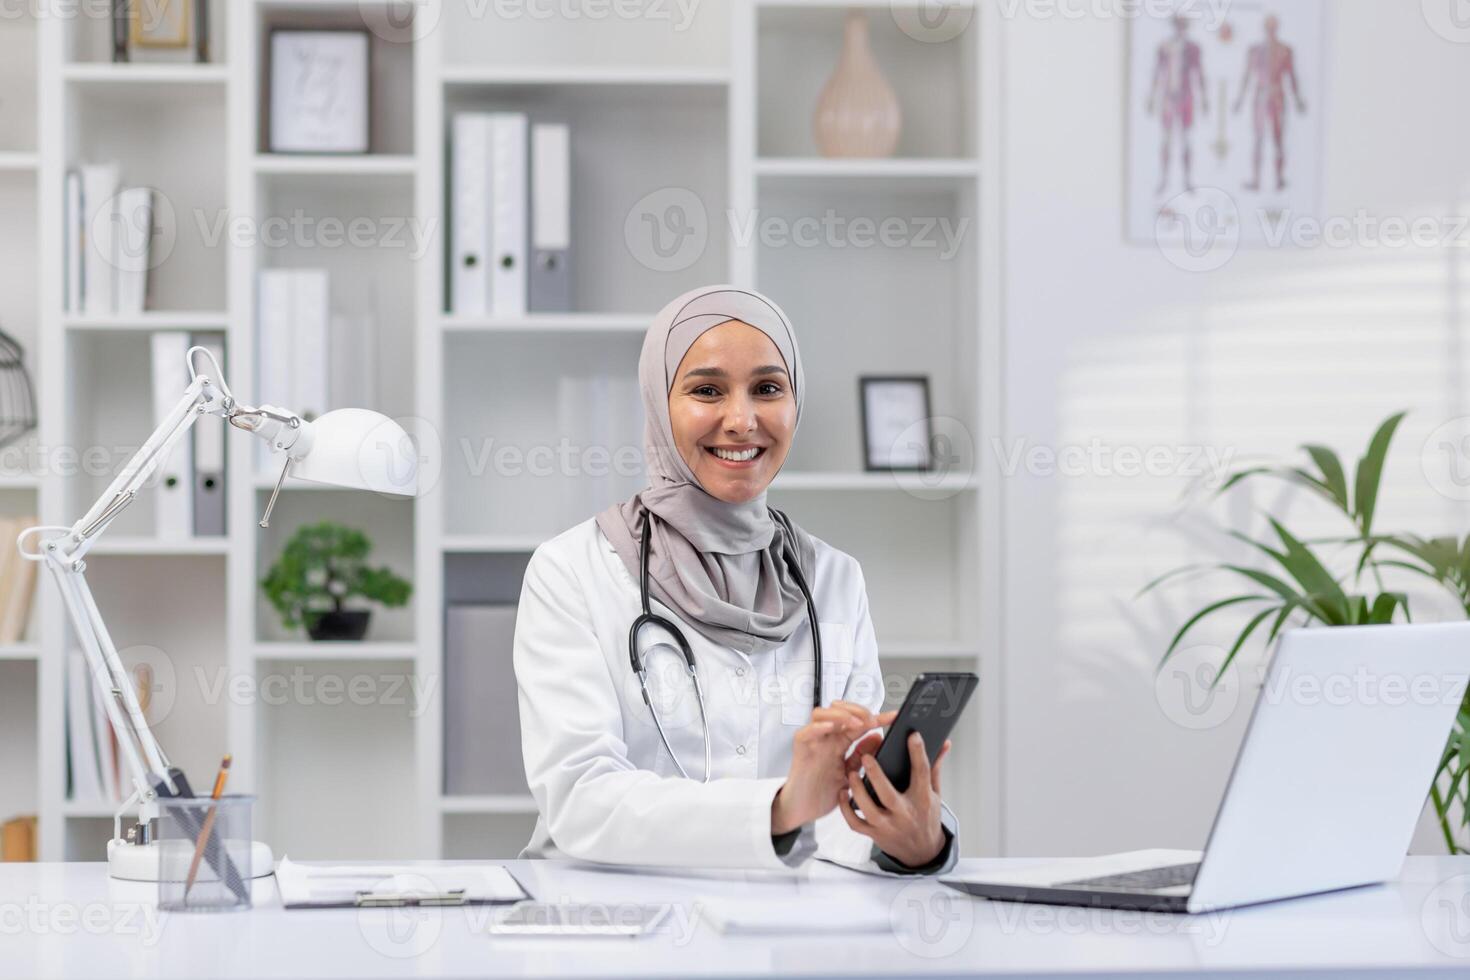 A cheerful female healthcare professional in a hijab sits at her office desk, using a smartphone and looking at a laptop, conveying a sense of accessibility and modern healthcare. photo